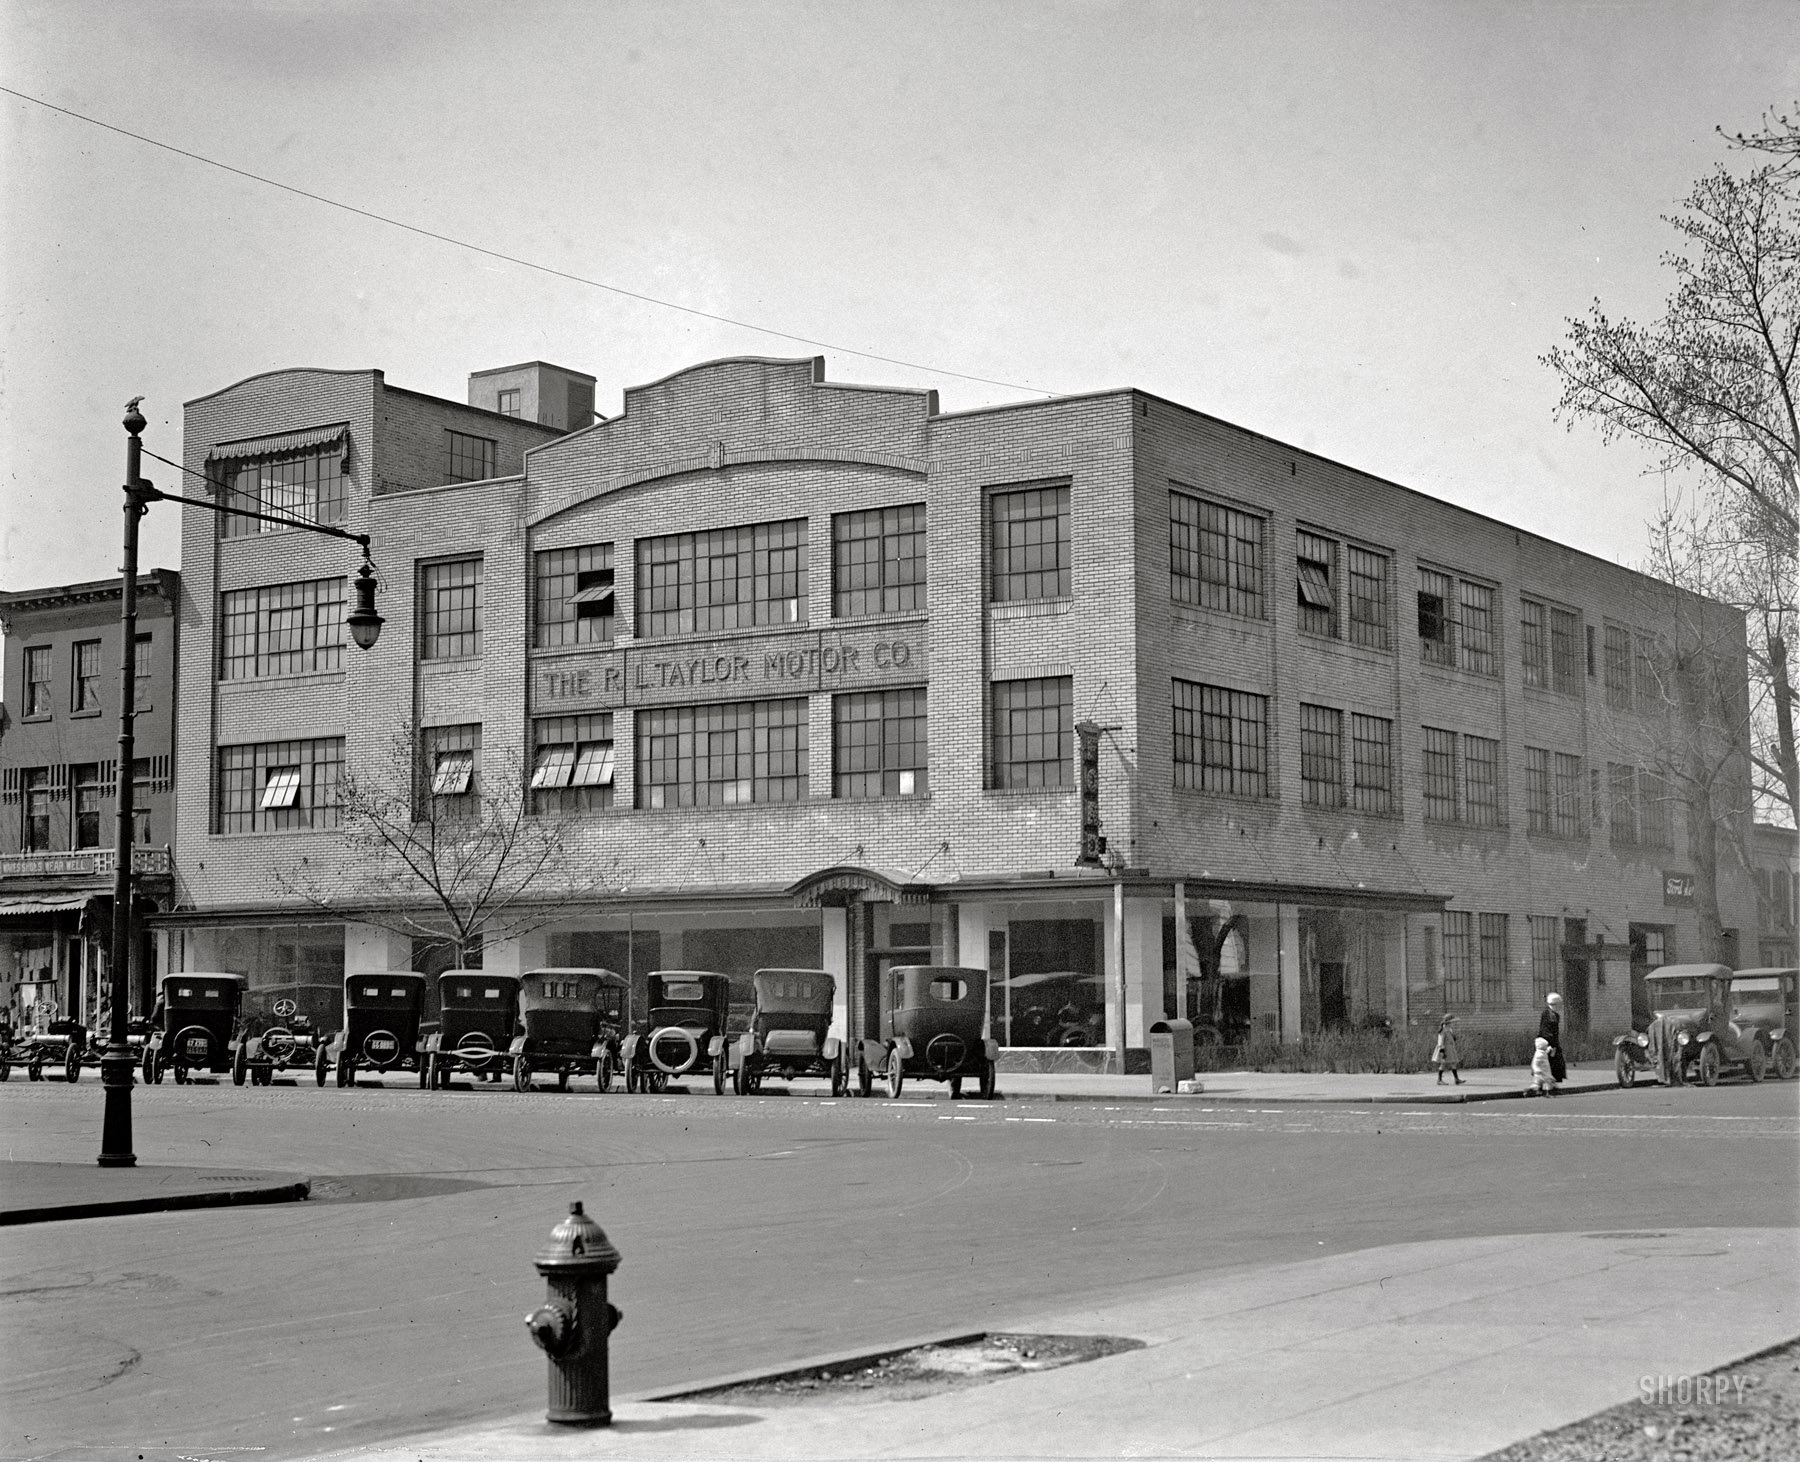 1923. "Taylor Motor Co. exterior," a Ford dealership in Washington, D.C. 5x4 glass negative, National Photo Company Collection. View full size.